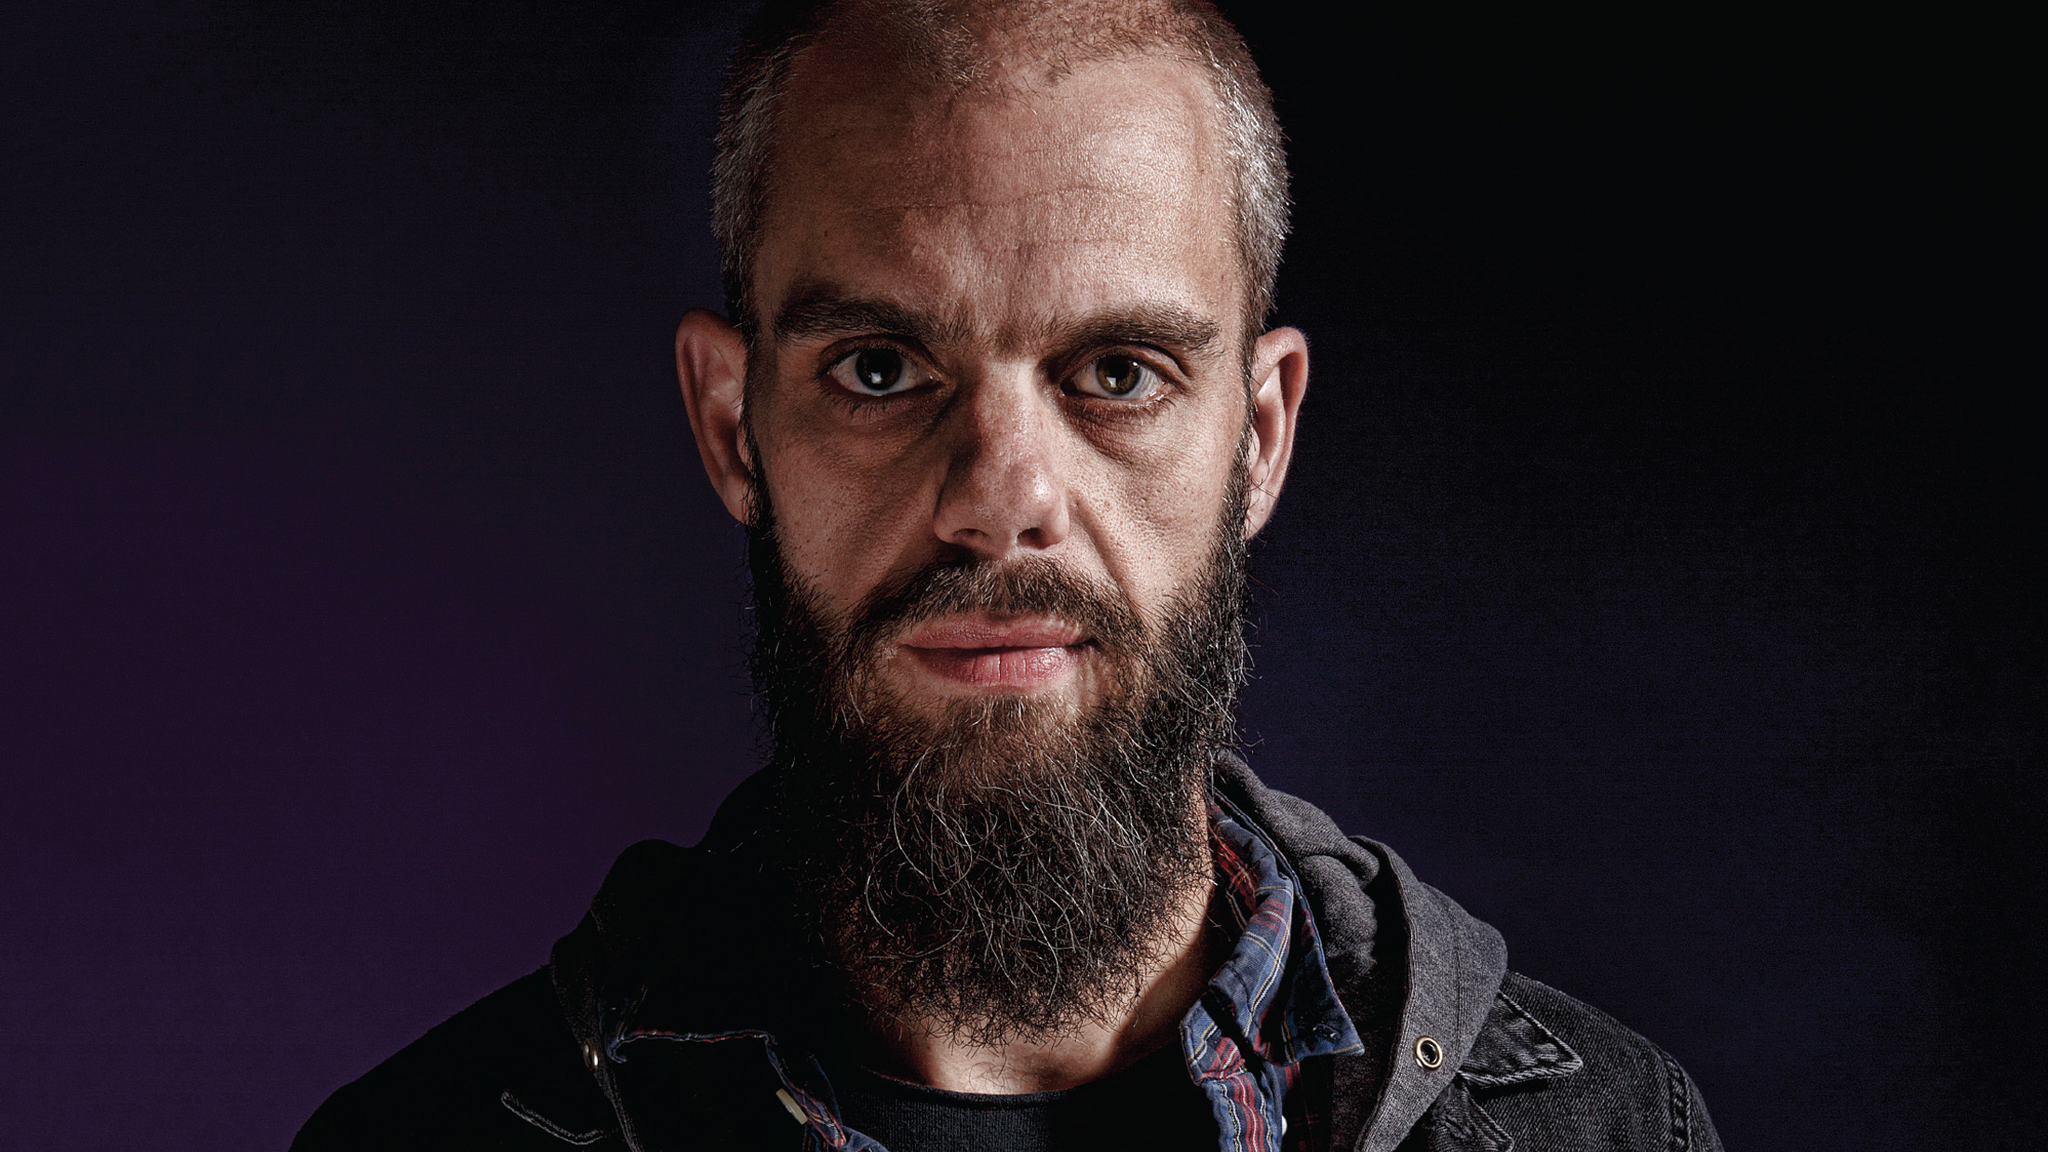 About John Baizley - artist and soloist of the Baroness band - Baroness, Metal, Artist, Cover, Longpost